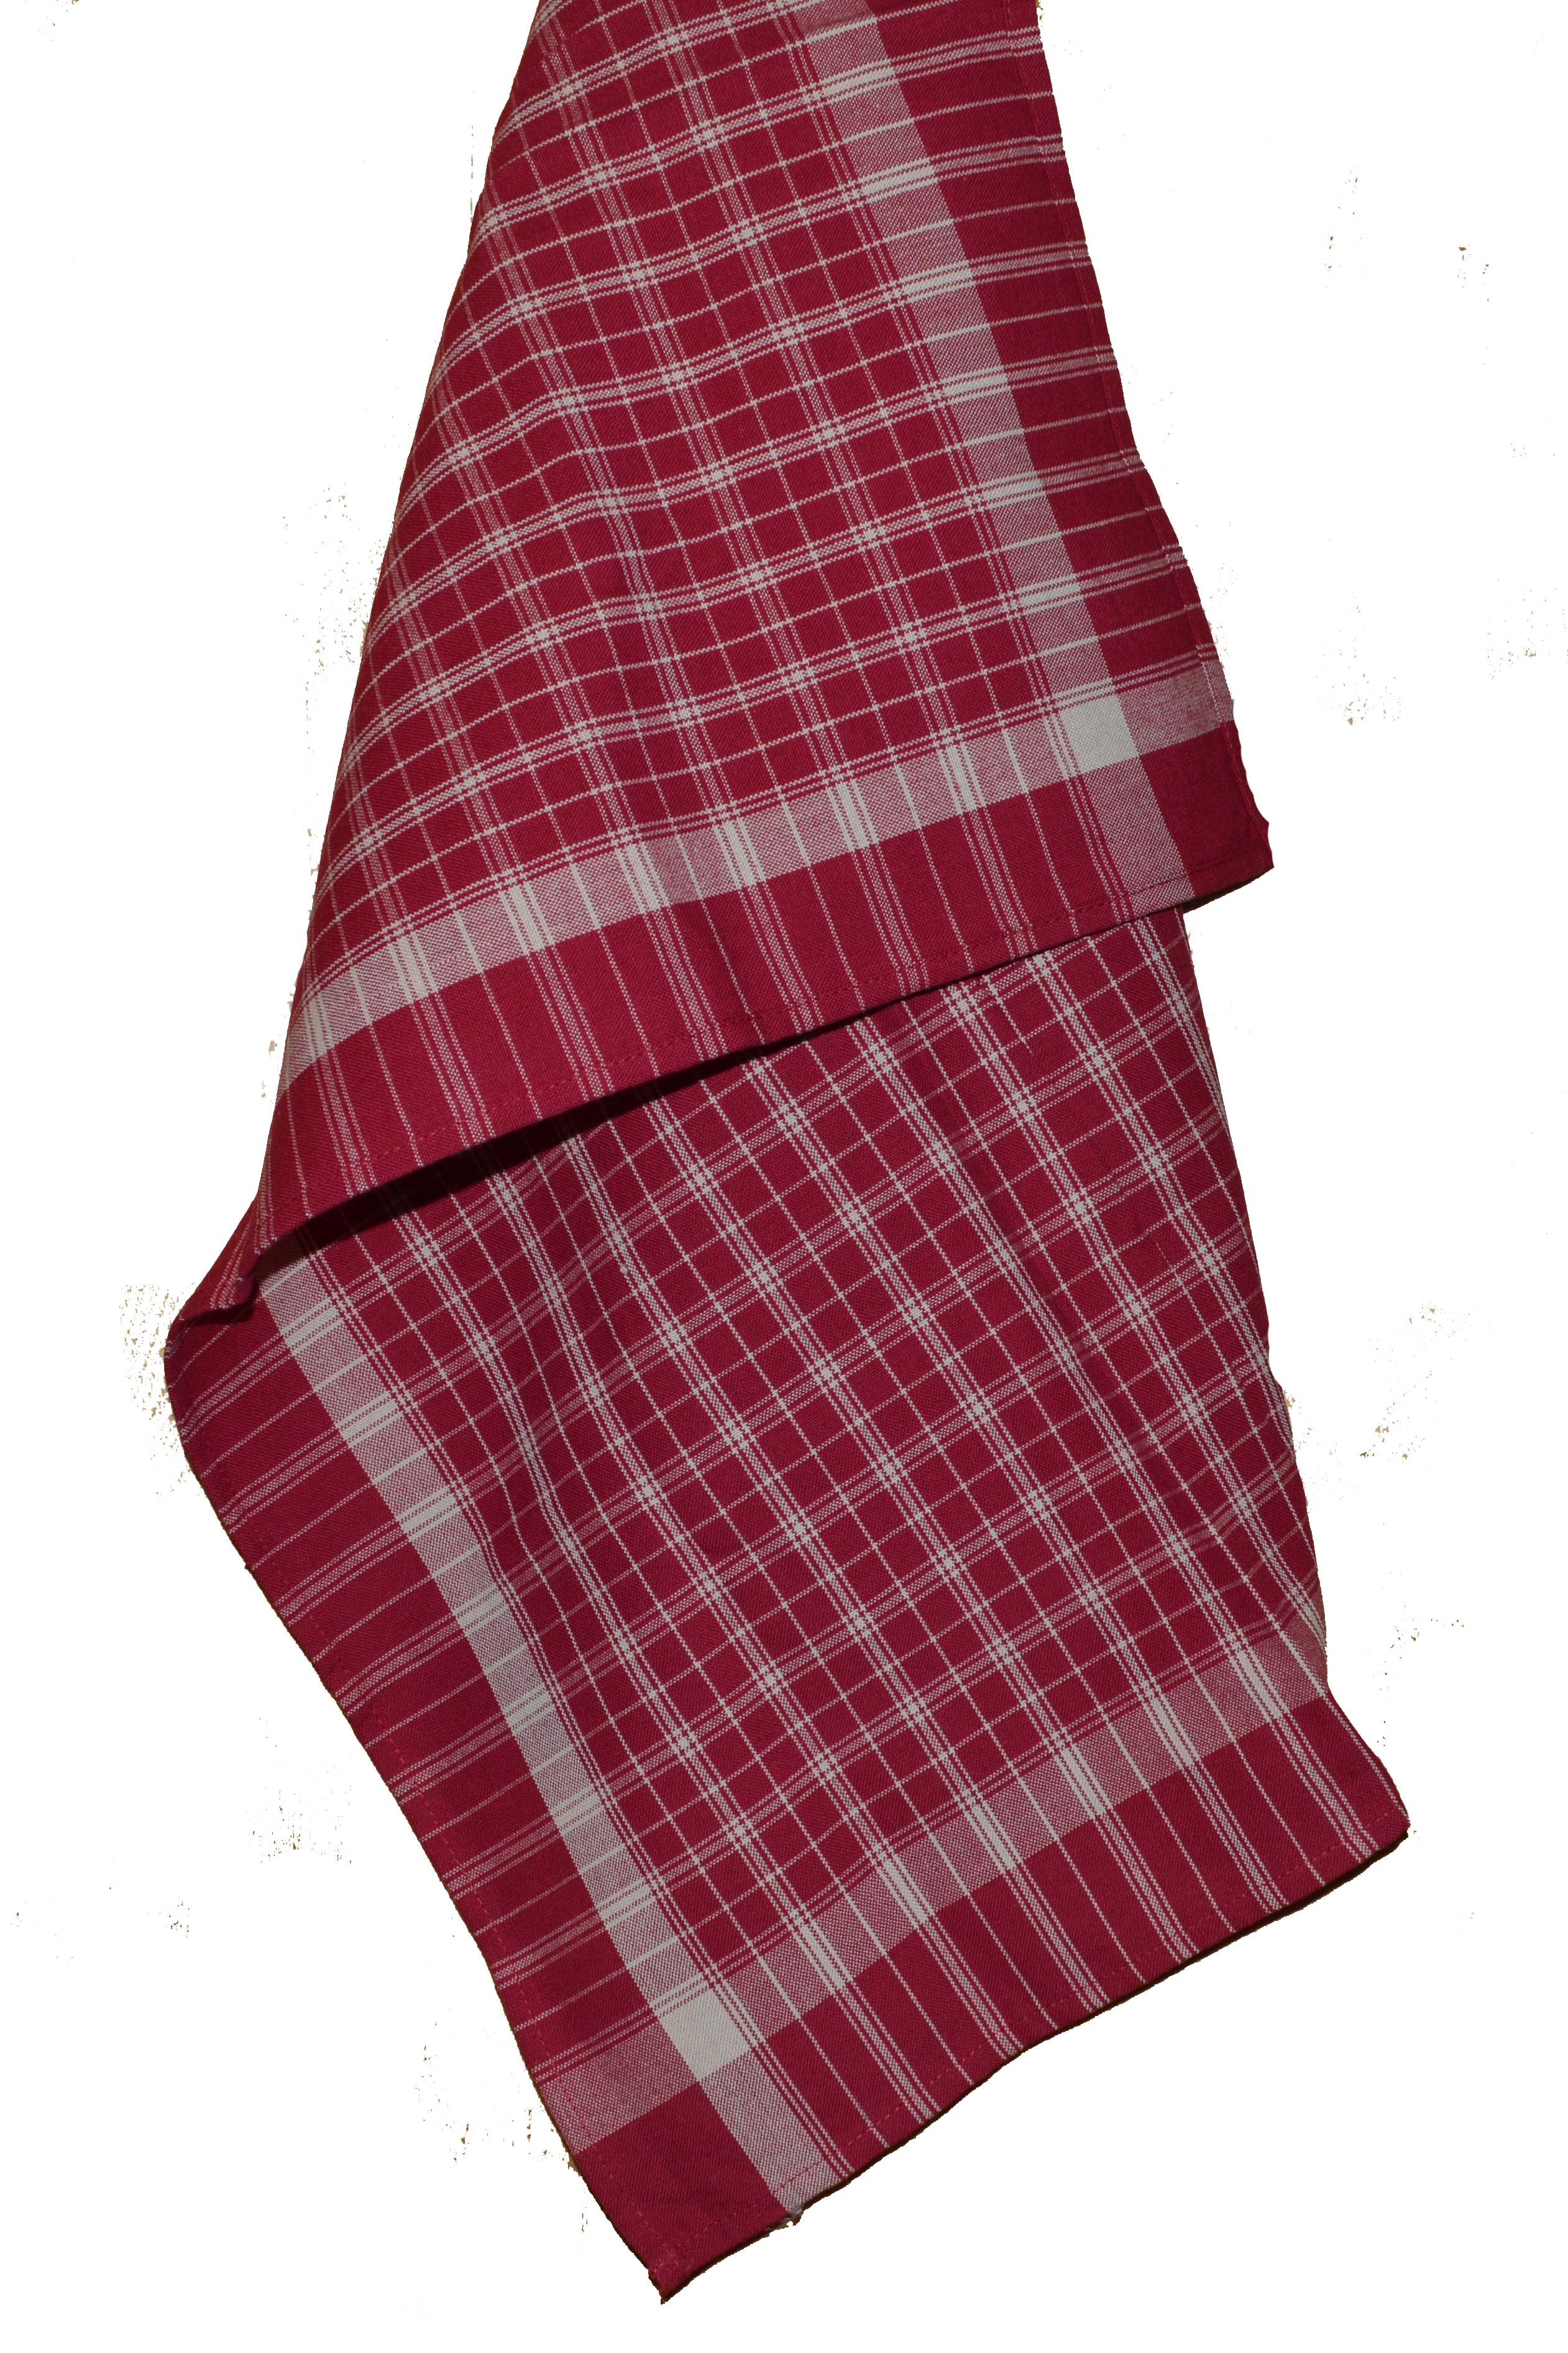 Dunroven House - Dish Towel